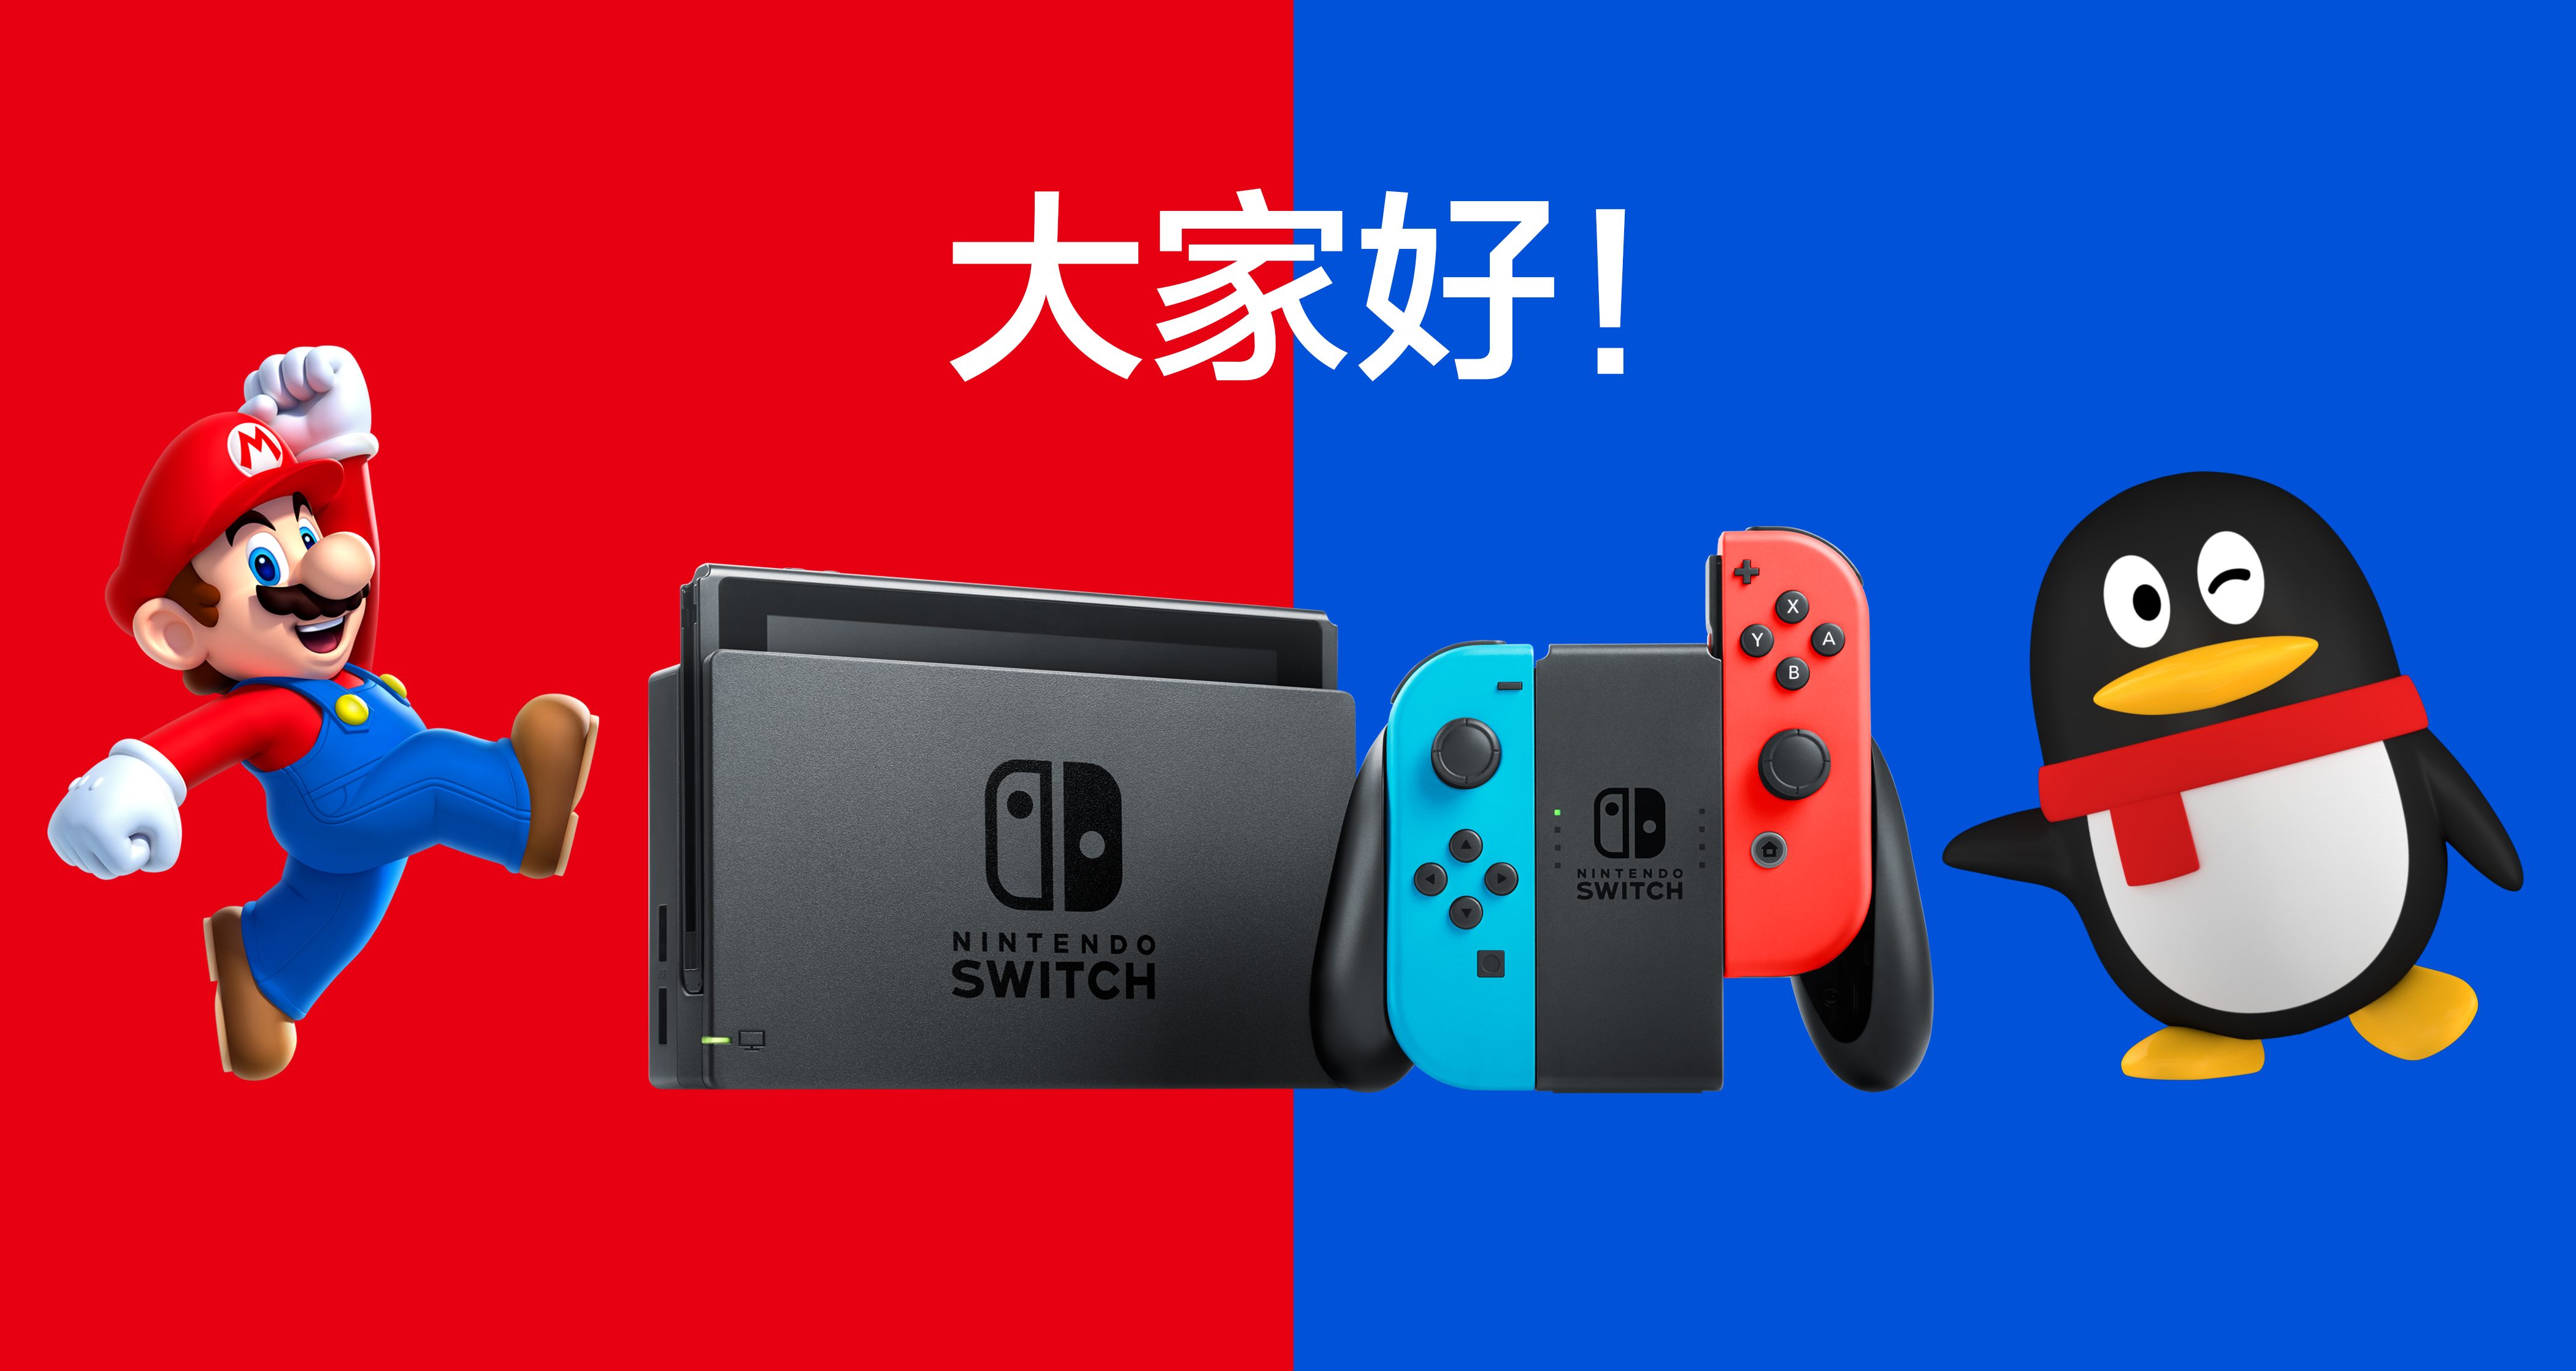 switch total sales